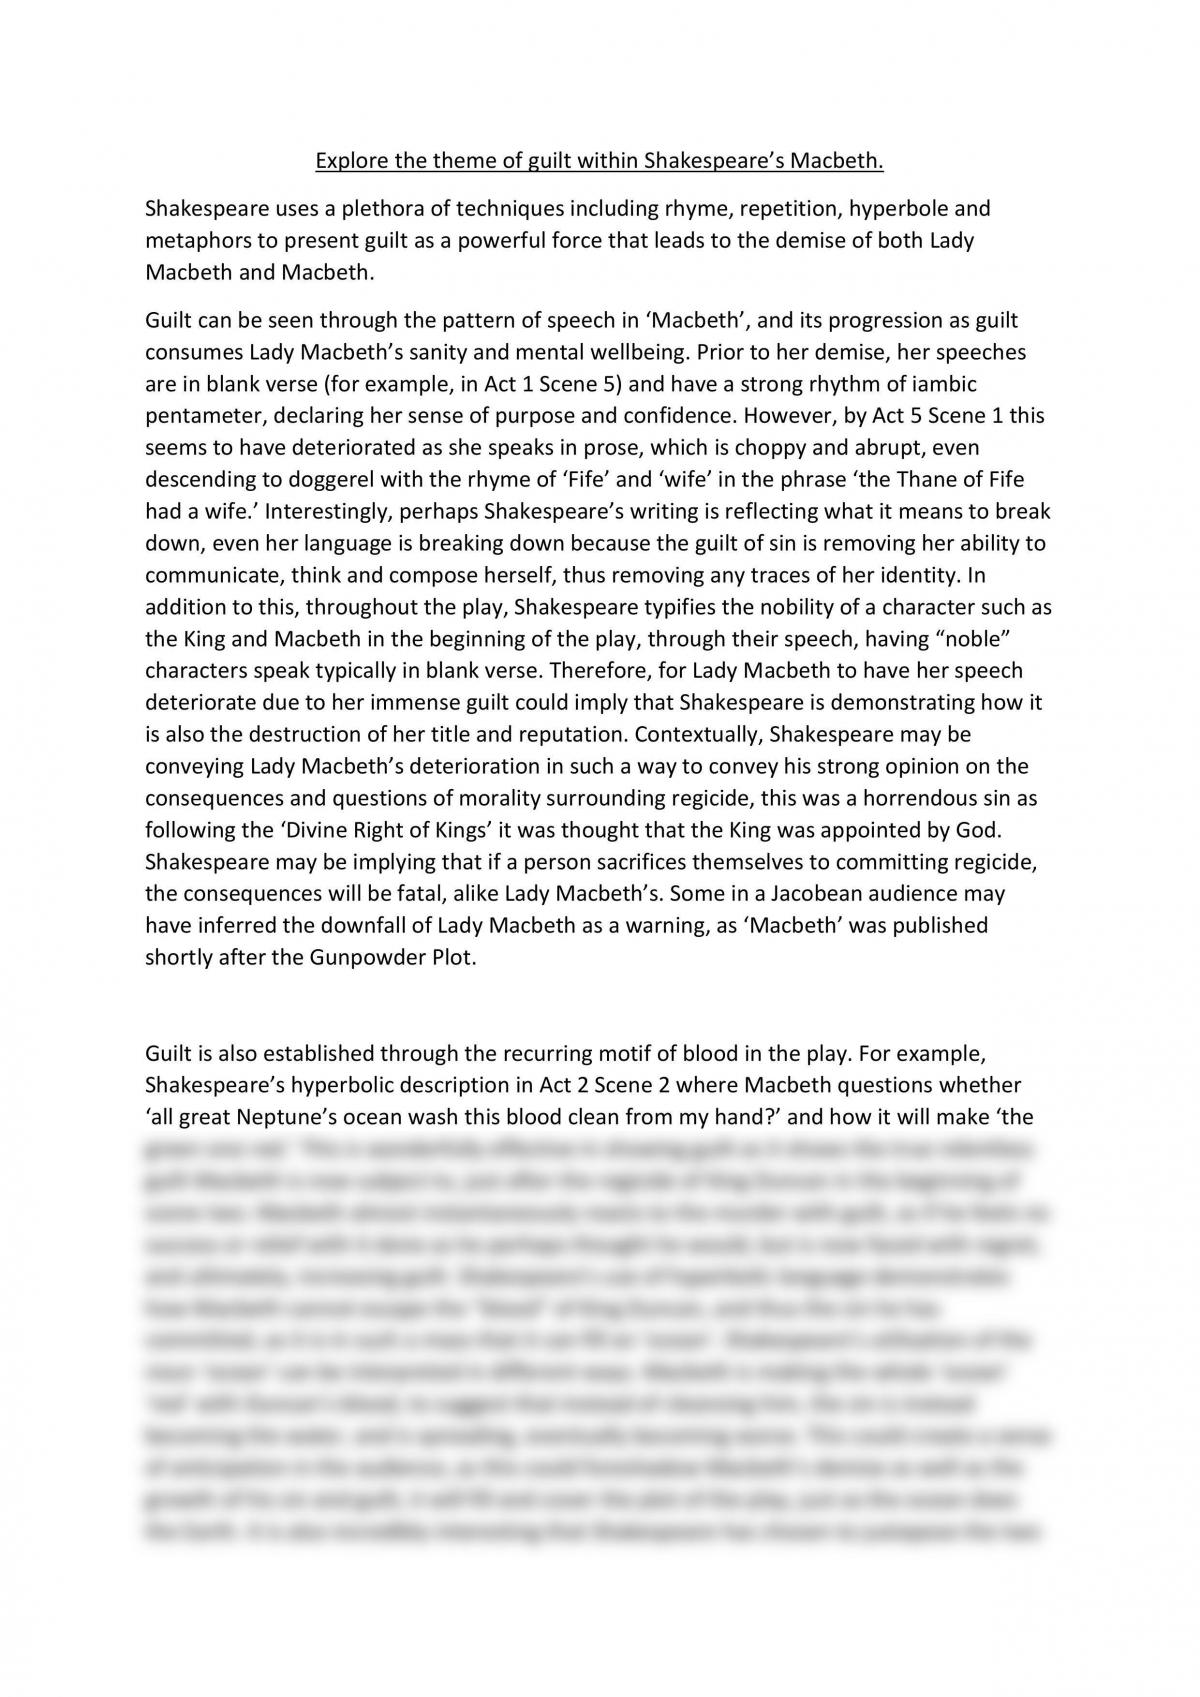 thesis about guilt in macbeth